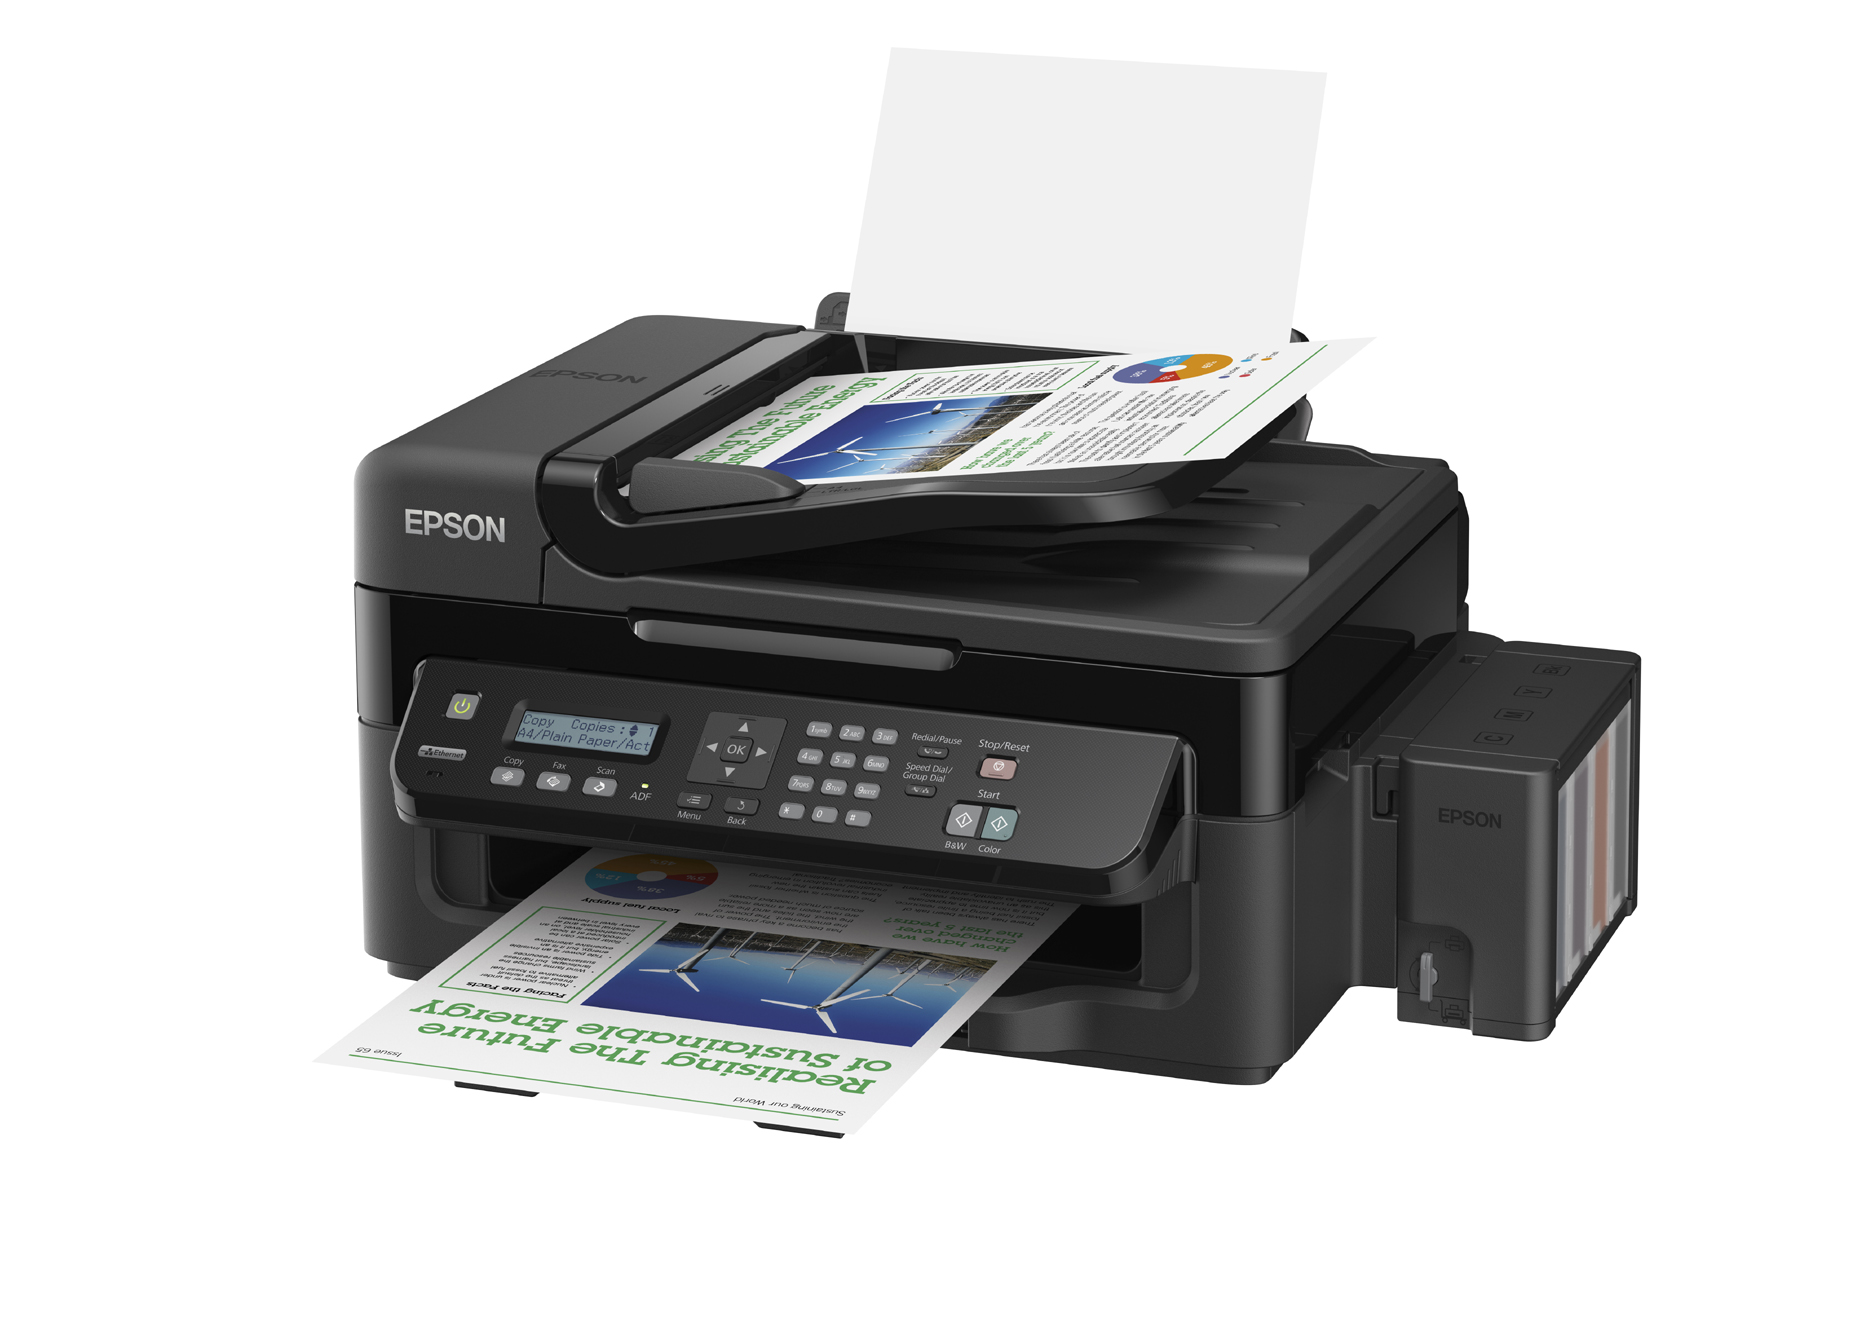 Epson L550 Printer Review Price And Specification Dri 6197